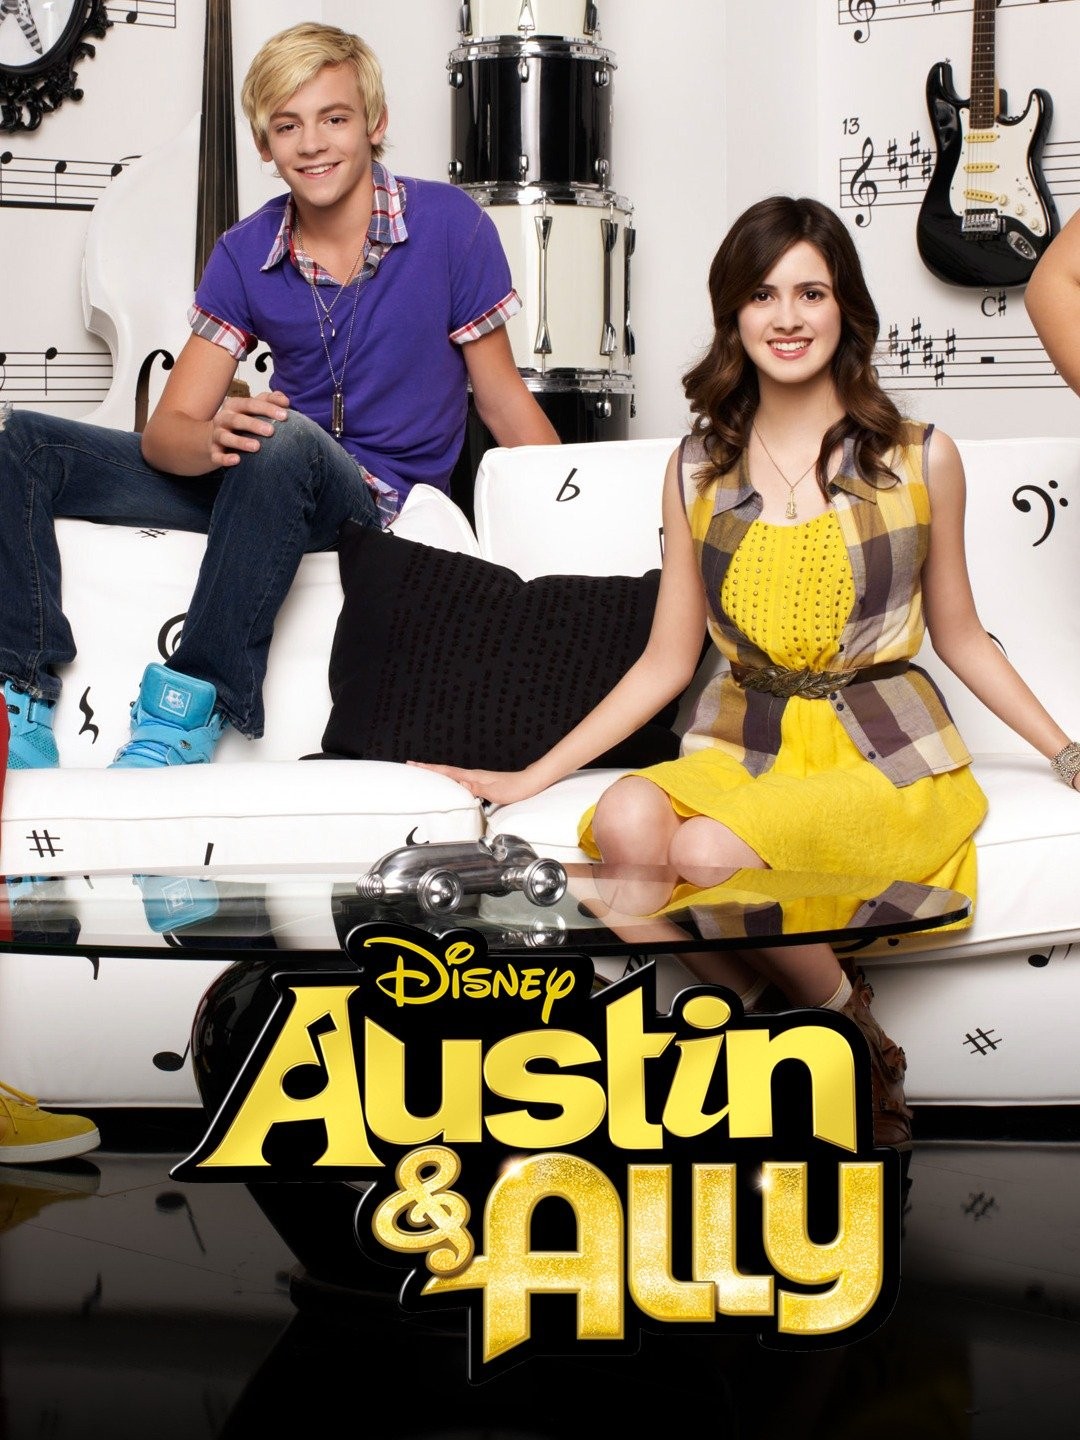 cristiano andre share austin and ally sex photos